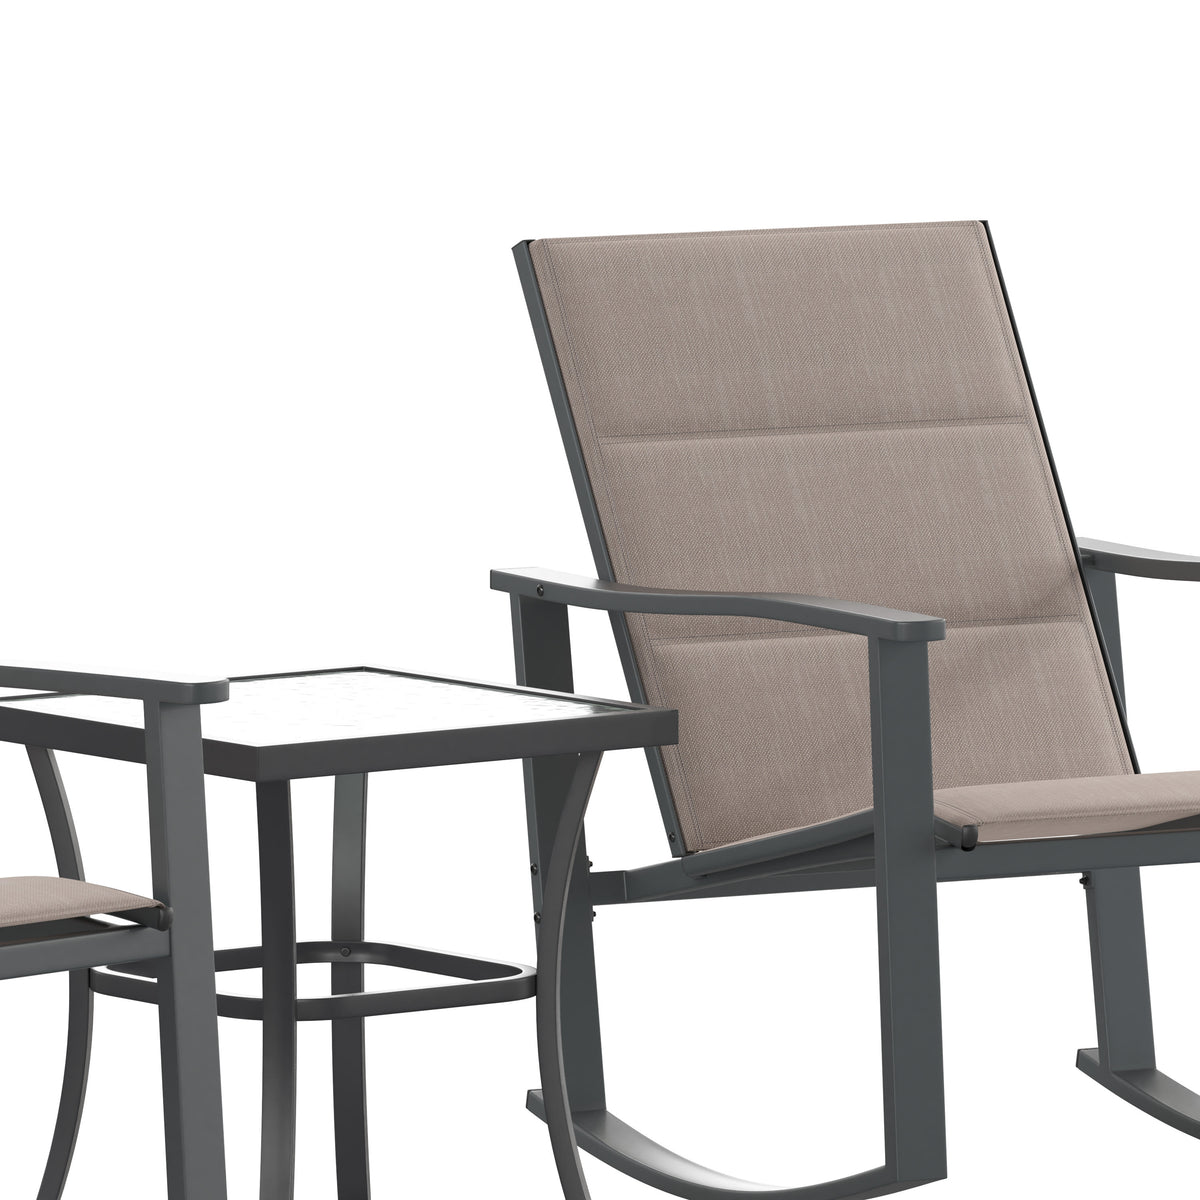 Brown |#| 3 Piece All-Weather Rocking Chairs and Glass Top Table Bistro Set - Brown/Black